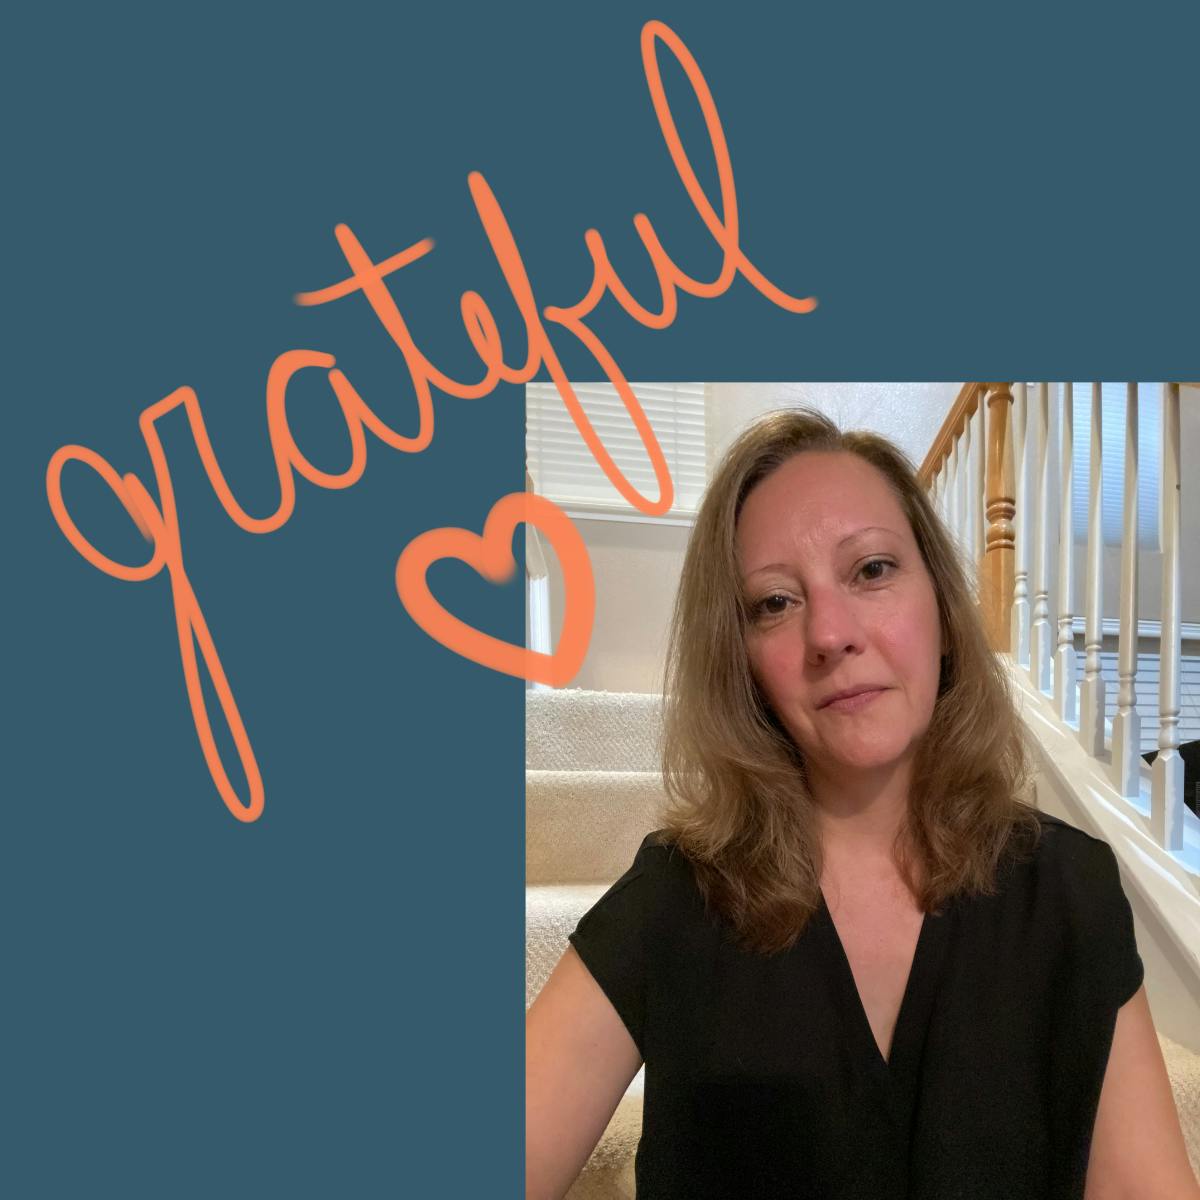 A photo of Stephanie with the word "grateful" written across the screen in a scripted font followed by a drawn heart.